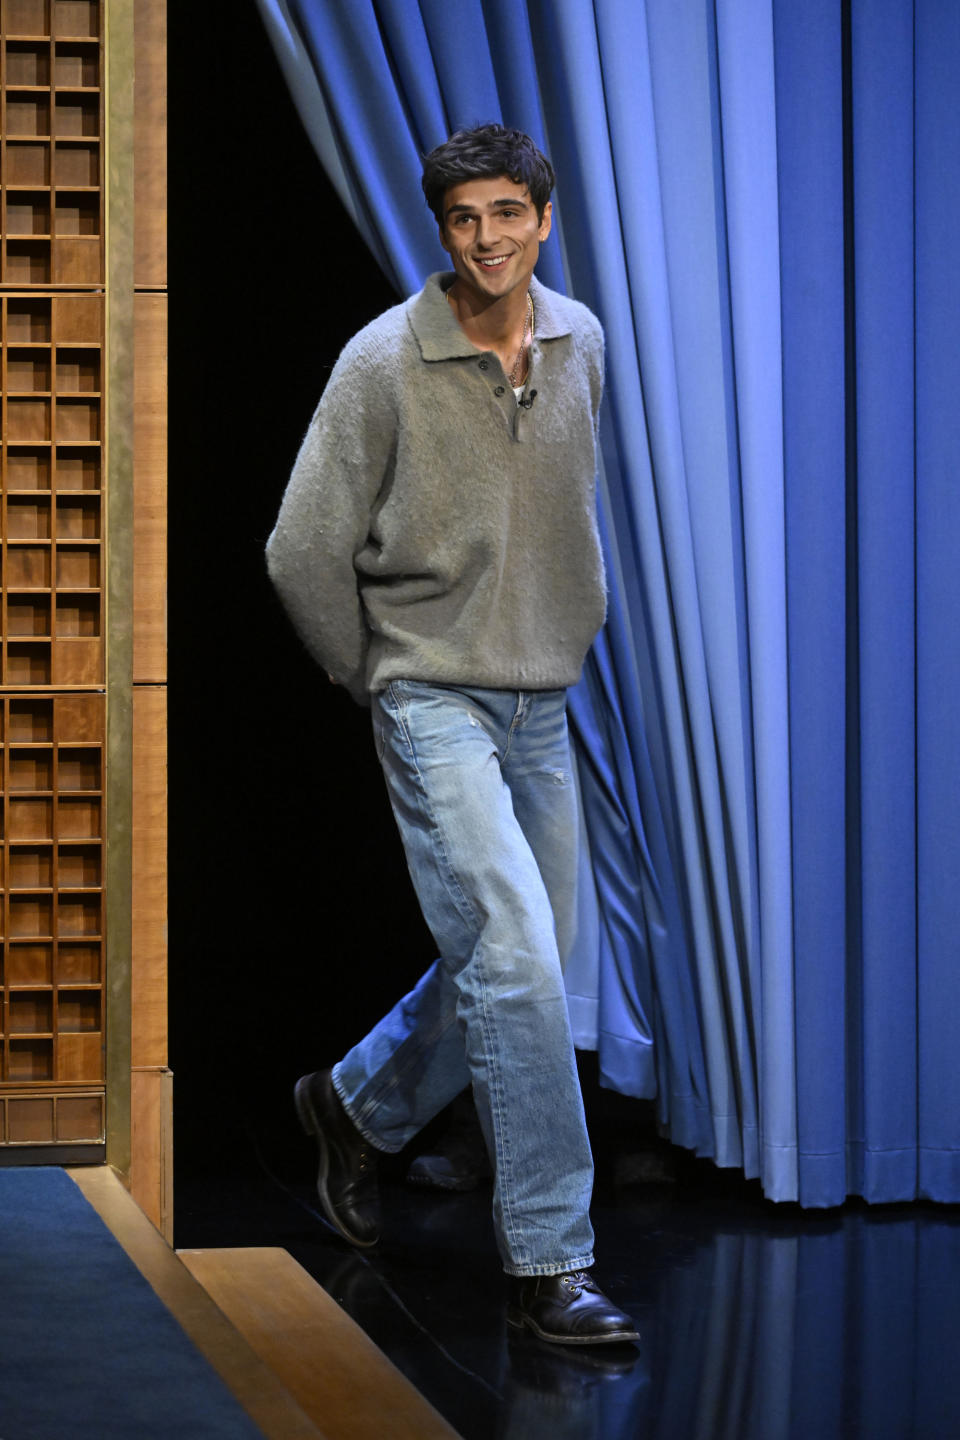 Jacob Elordi onstage next to a blue curtain.